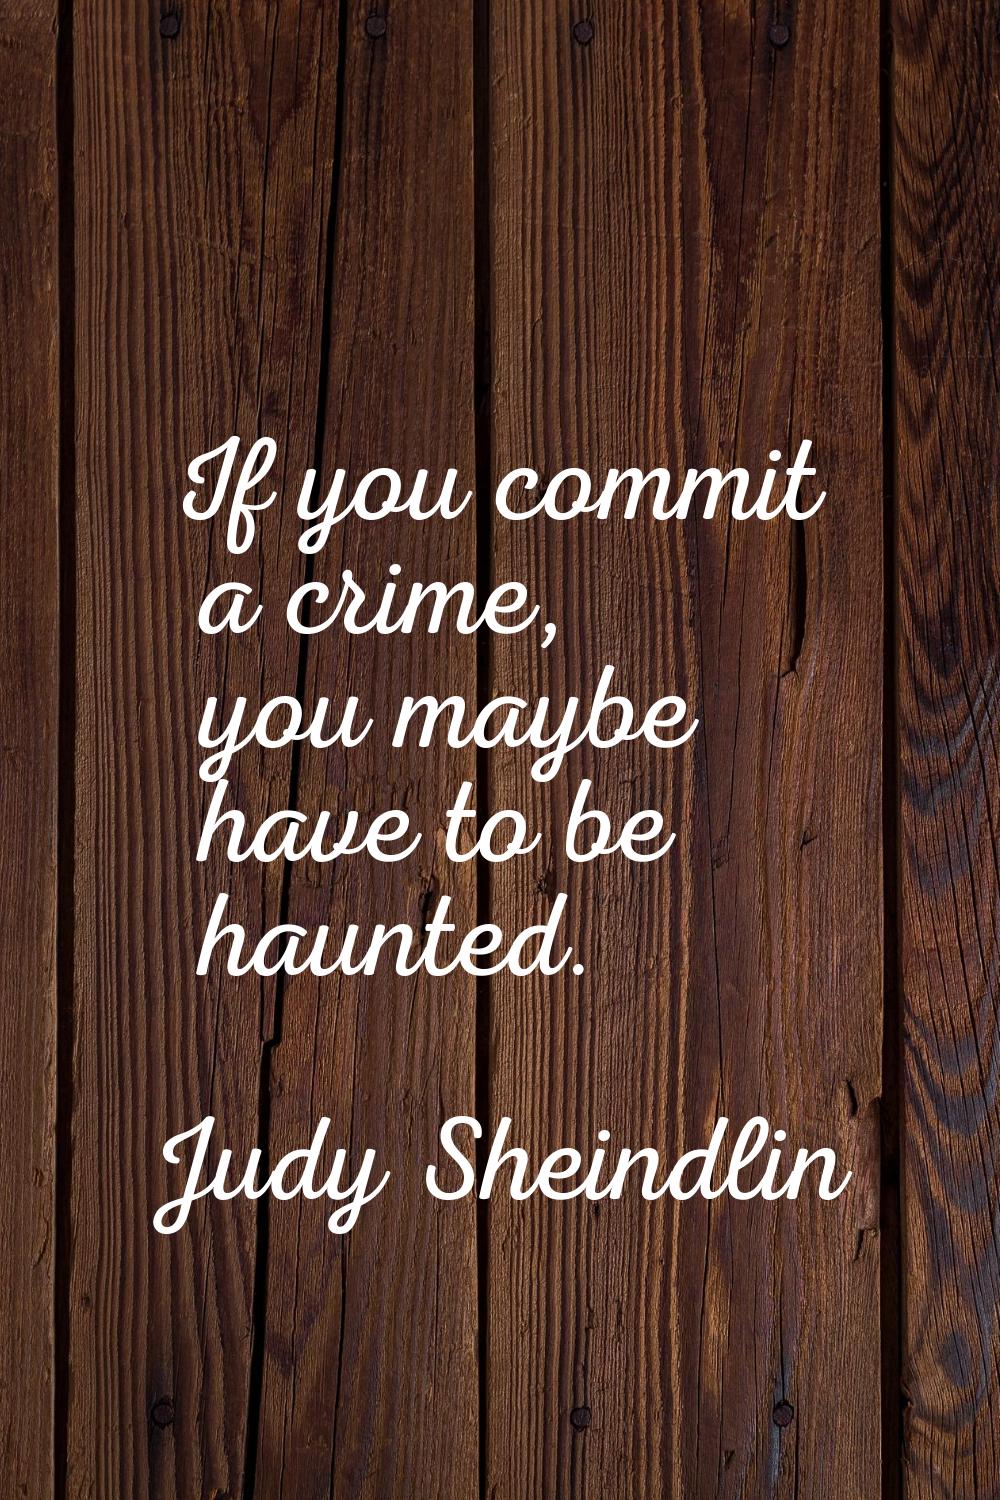 If you commit a crime, you maybe have to be haunted.